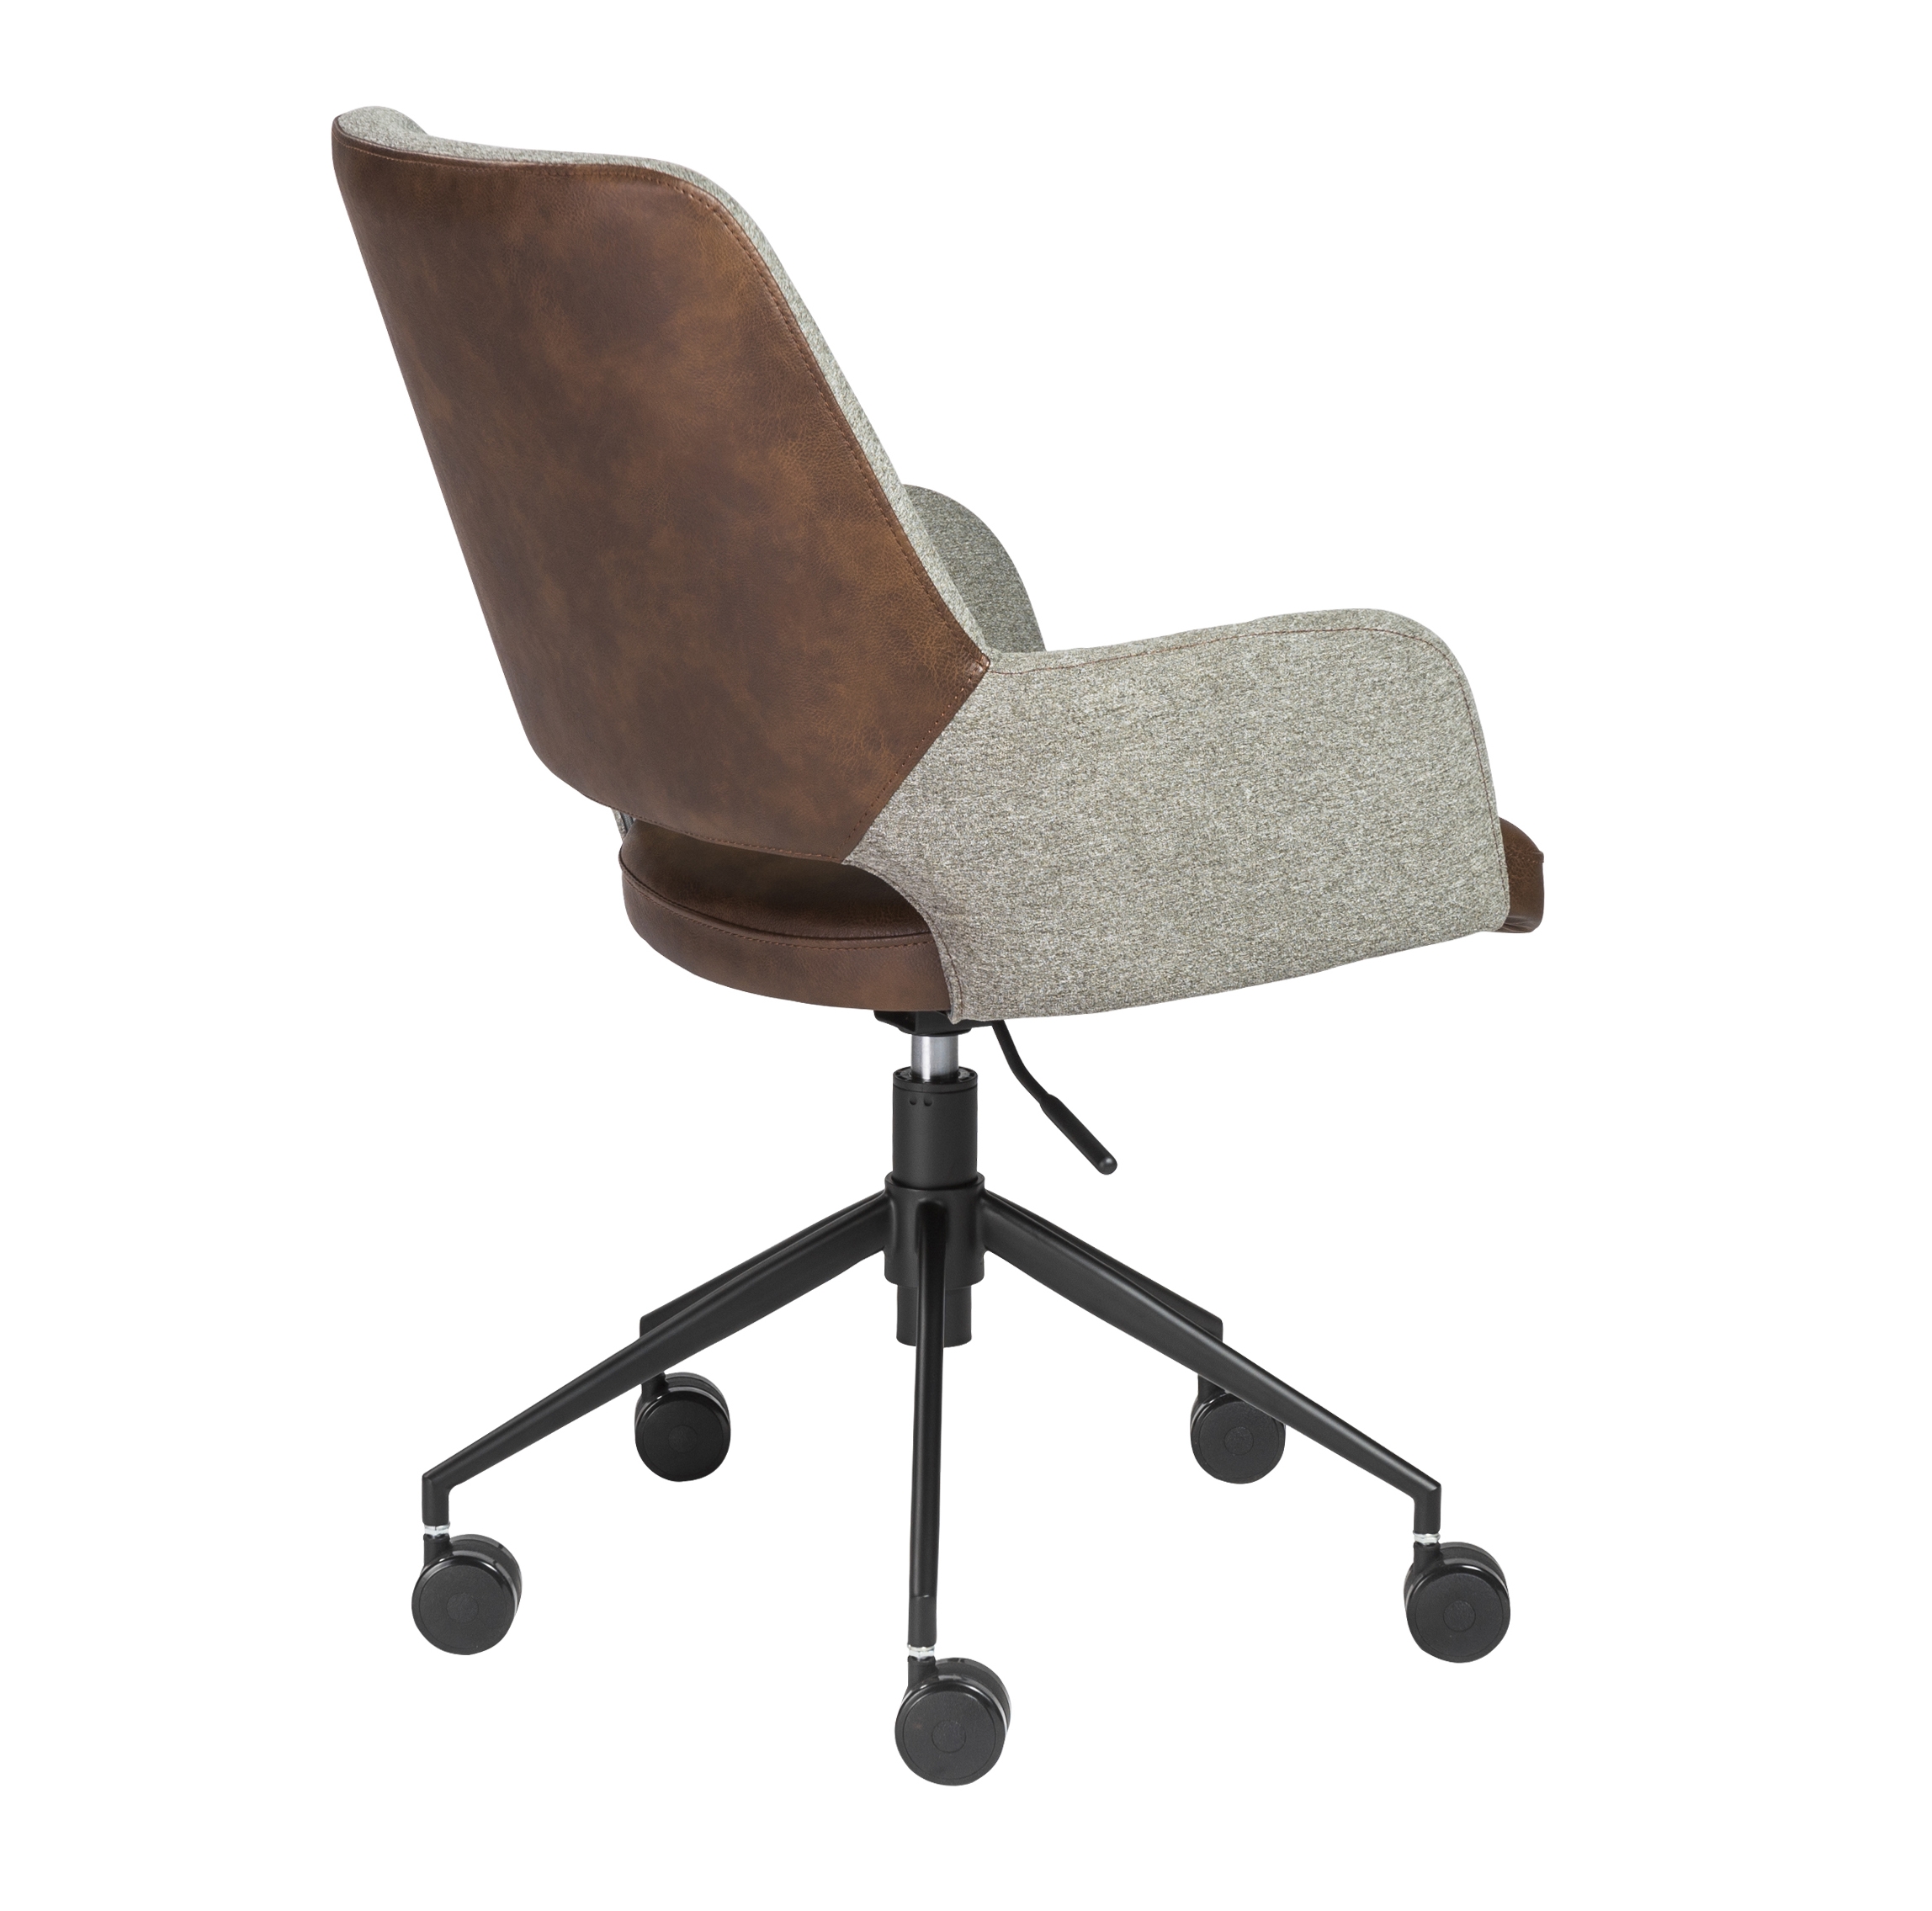 Randy Office Chair, Gray and Brown - Image 3